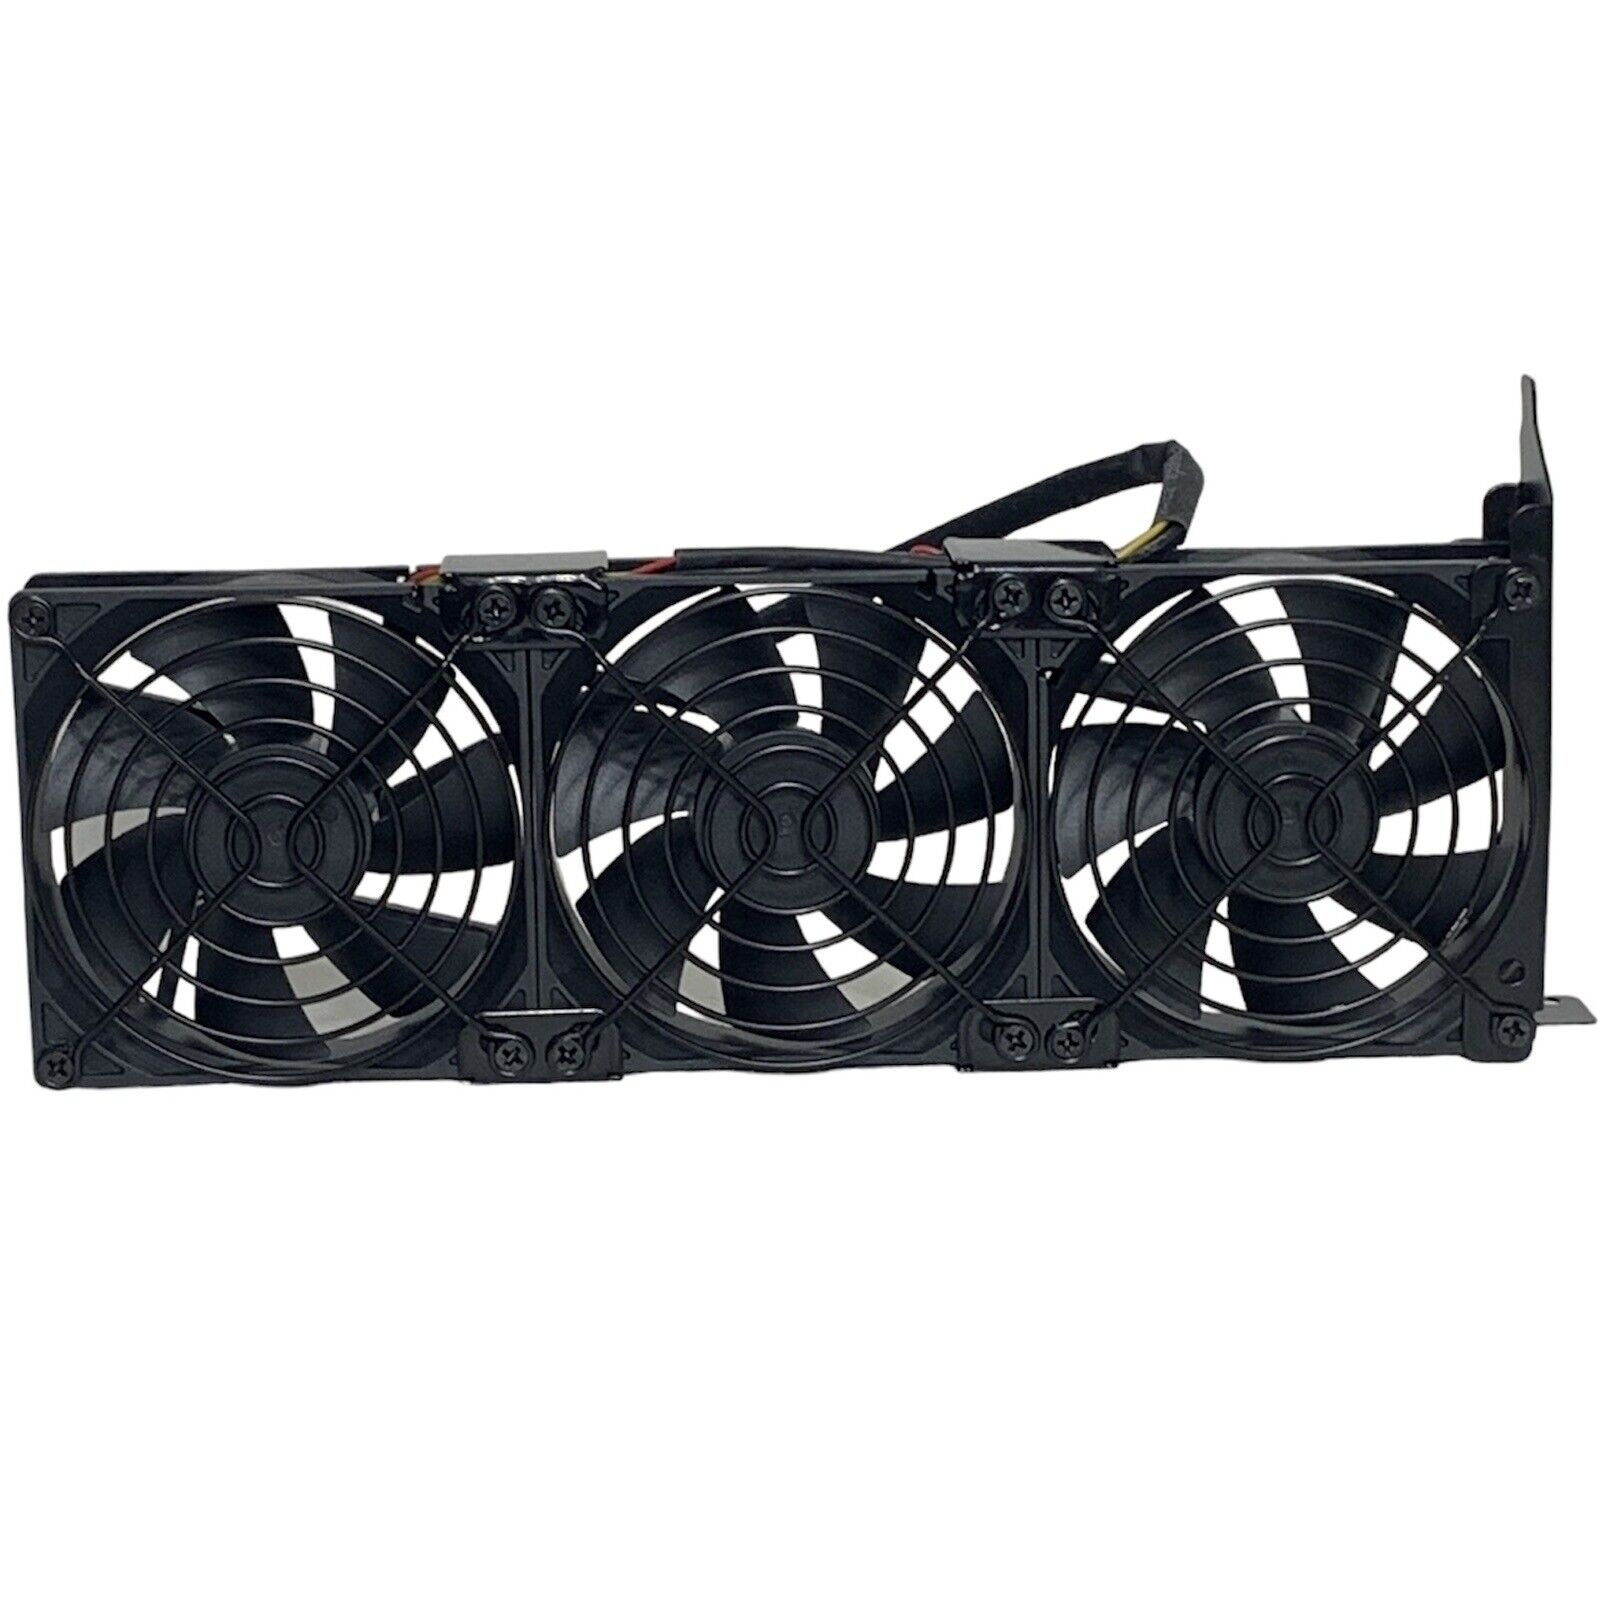 Dc 12V Computer PC CPU Fan Case 9225 92mm 92x92x25mm X3 3 Pin Triple Chassis New